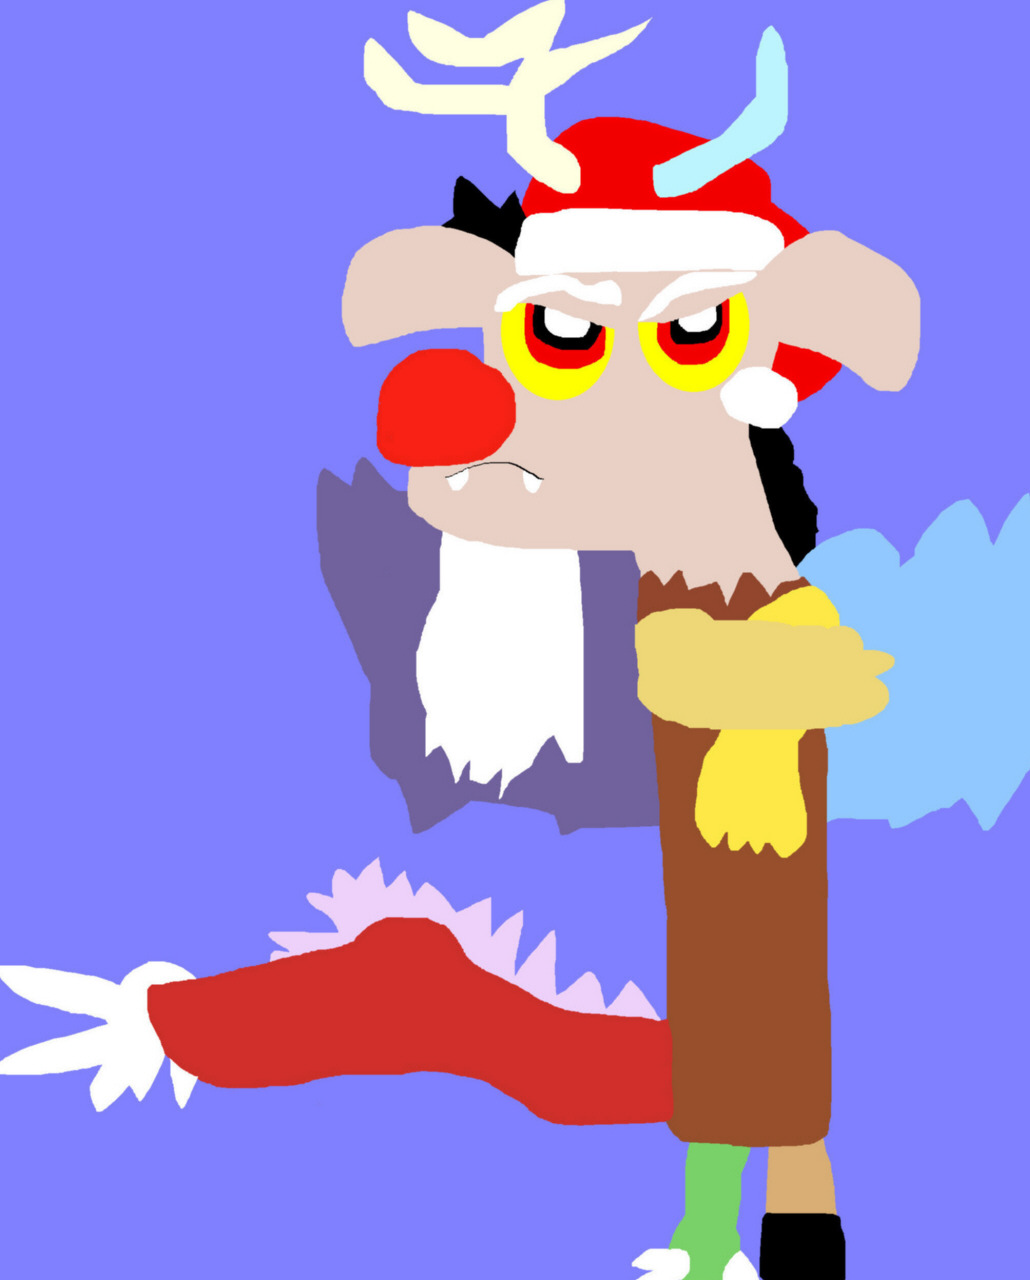 Discord The Red Nosed Draconequus MS Paint^^ by Falconlobo